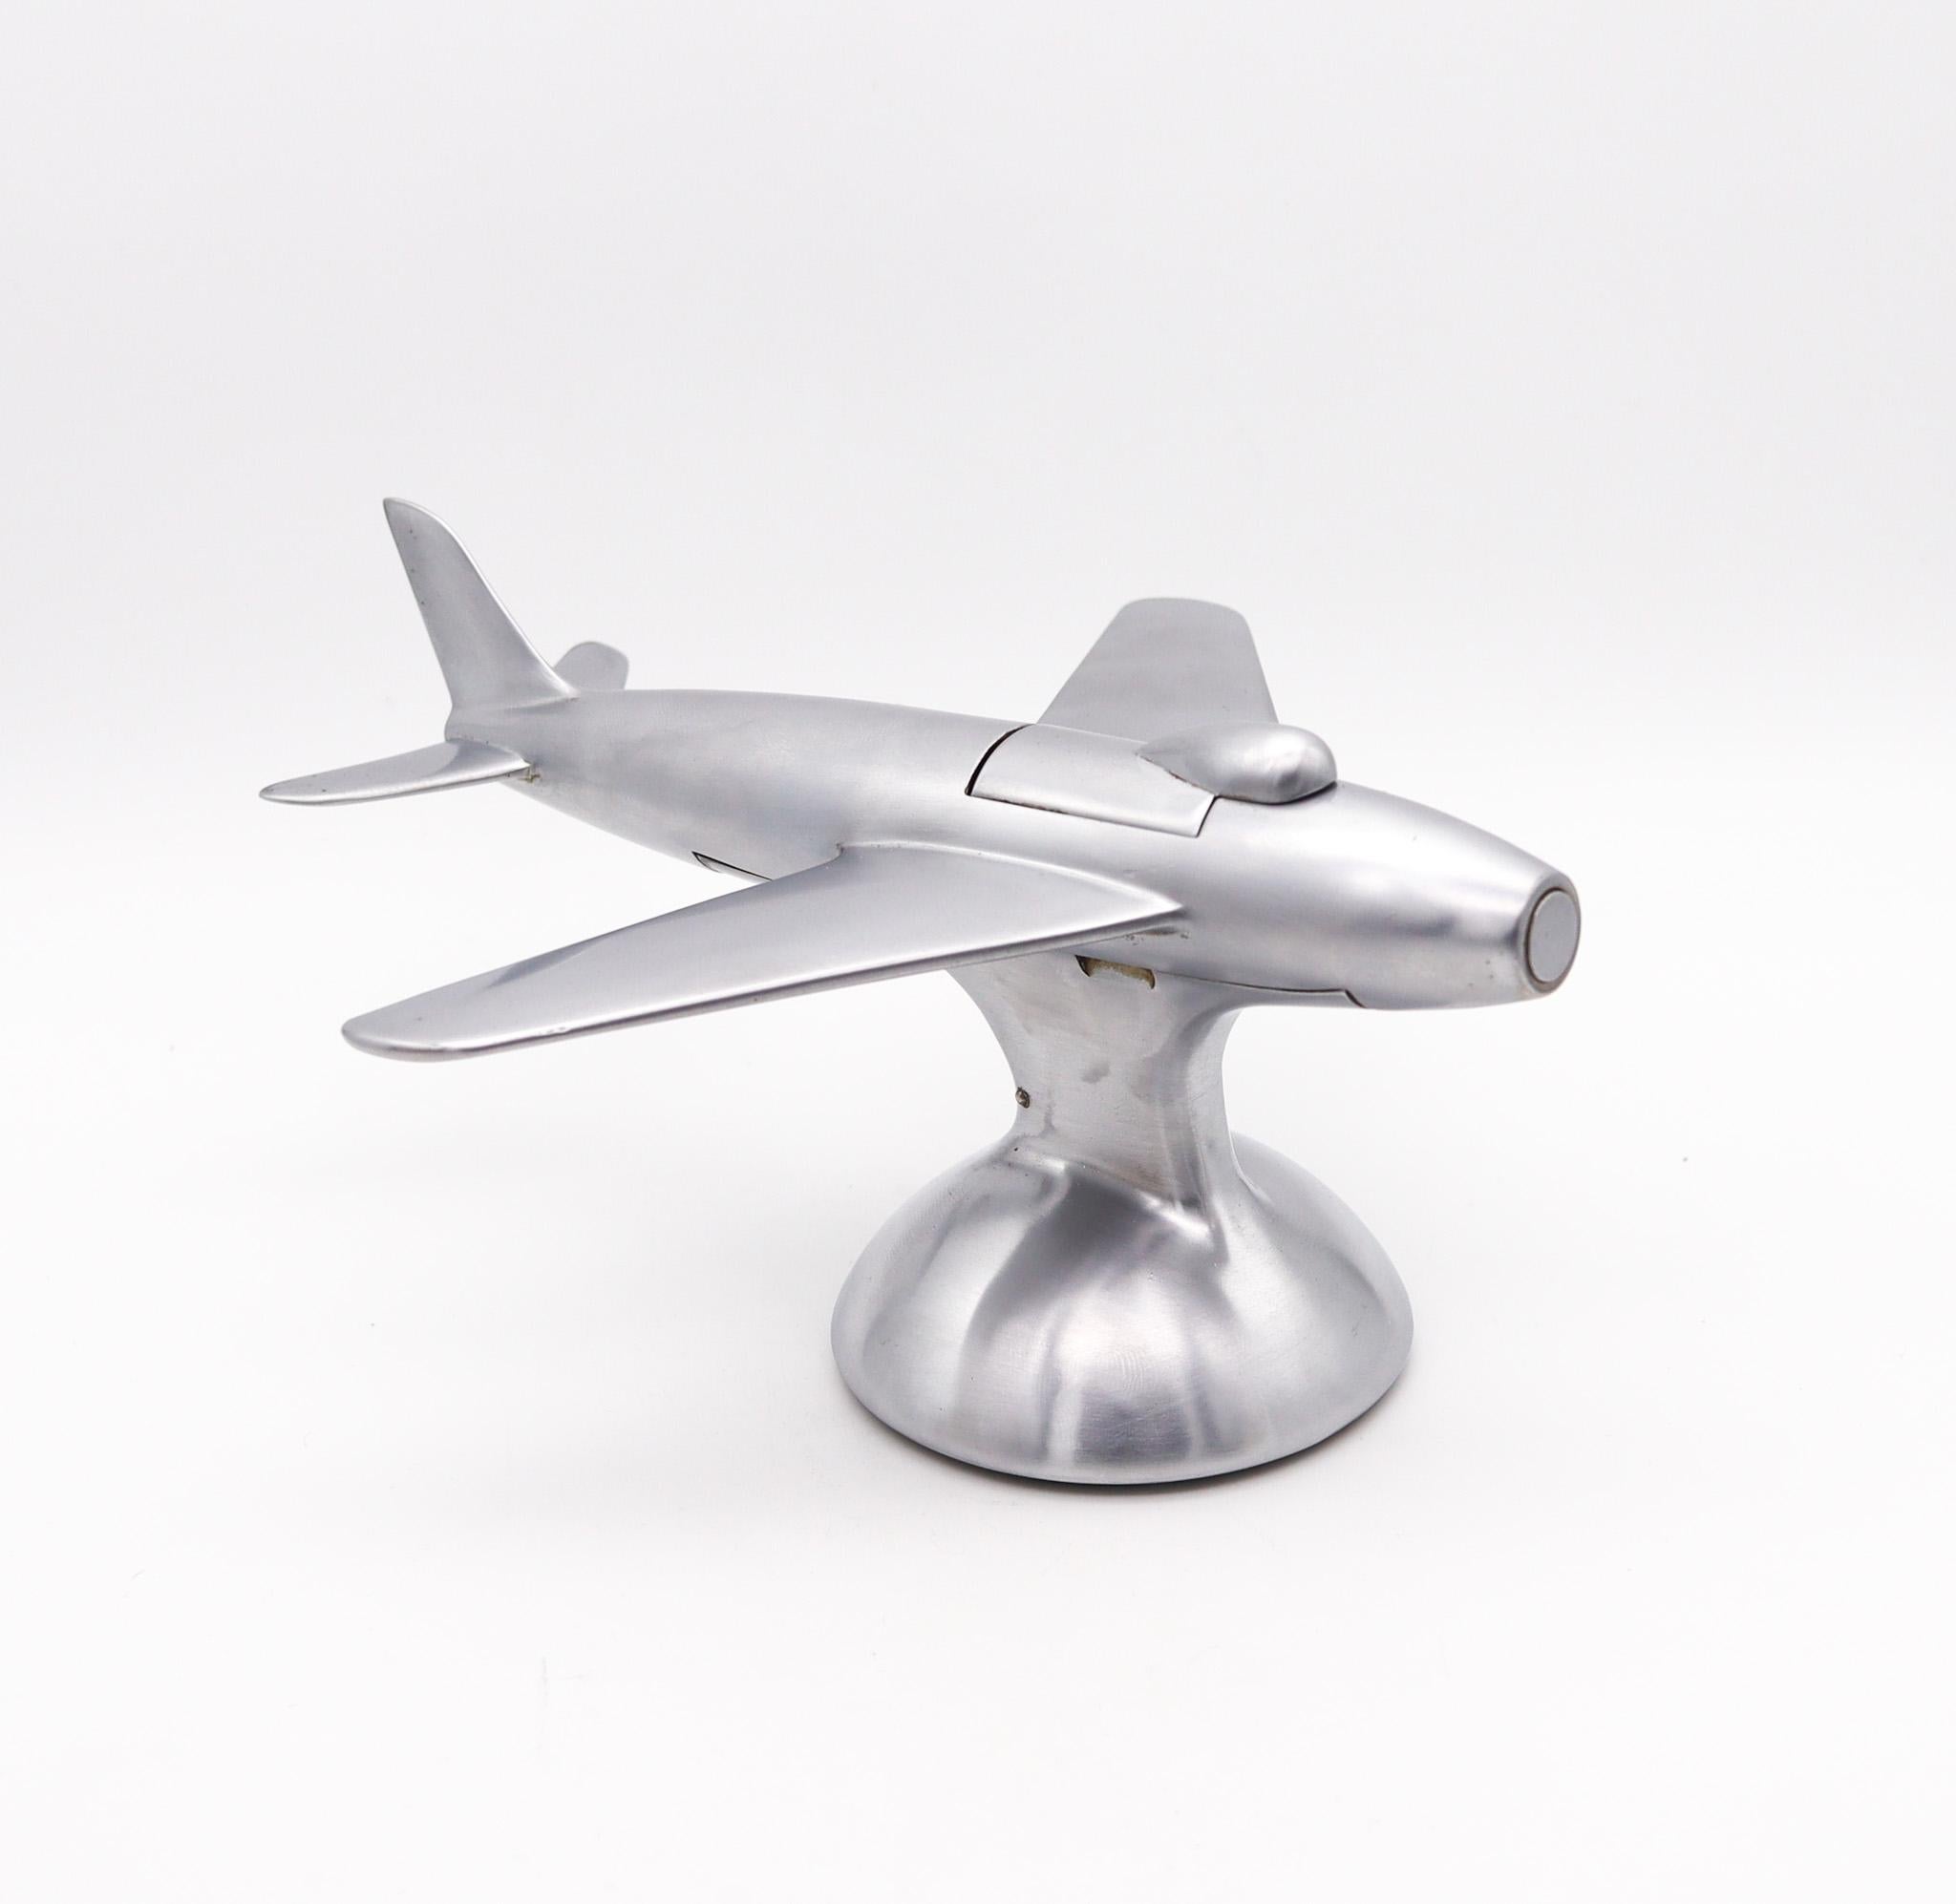 F-86 Jet fighter aircraft table lighter designed by Alfred Dunhill.

Very rare brushed aluminum table desk lighter made in London England by the renowned Alfred Dunhill Company, between 1954 and 1961. The lighter was done in the Mid-Century Modern